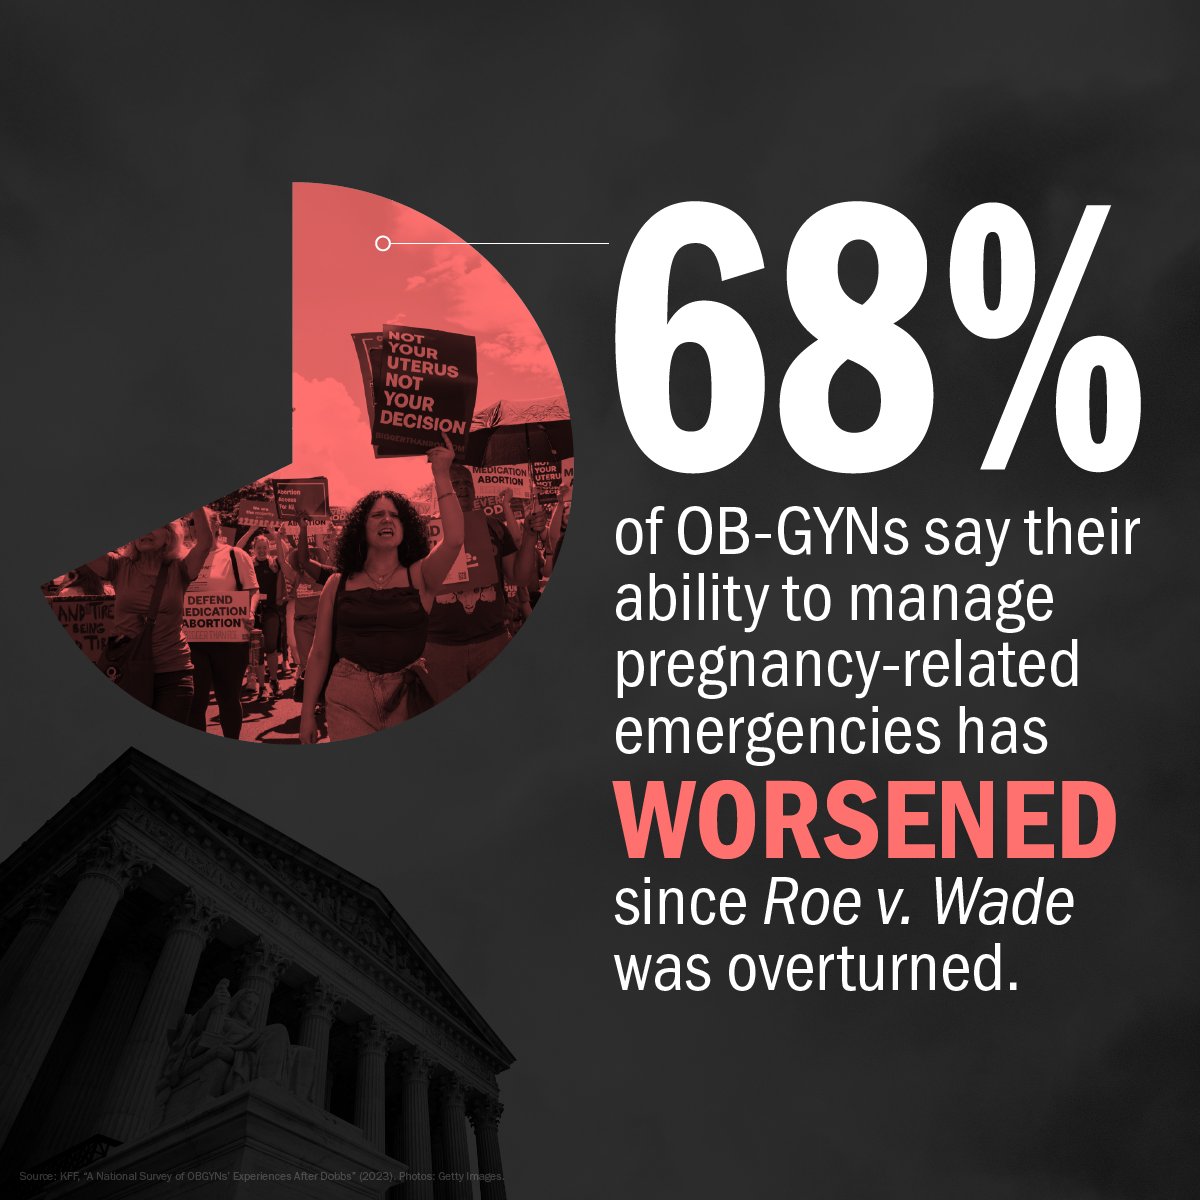 68% of ob-gyns say their ability to manage pregnancy-related emergencies has WORSENED since Roe v. Wade was overturned. Abortion is health care.